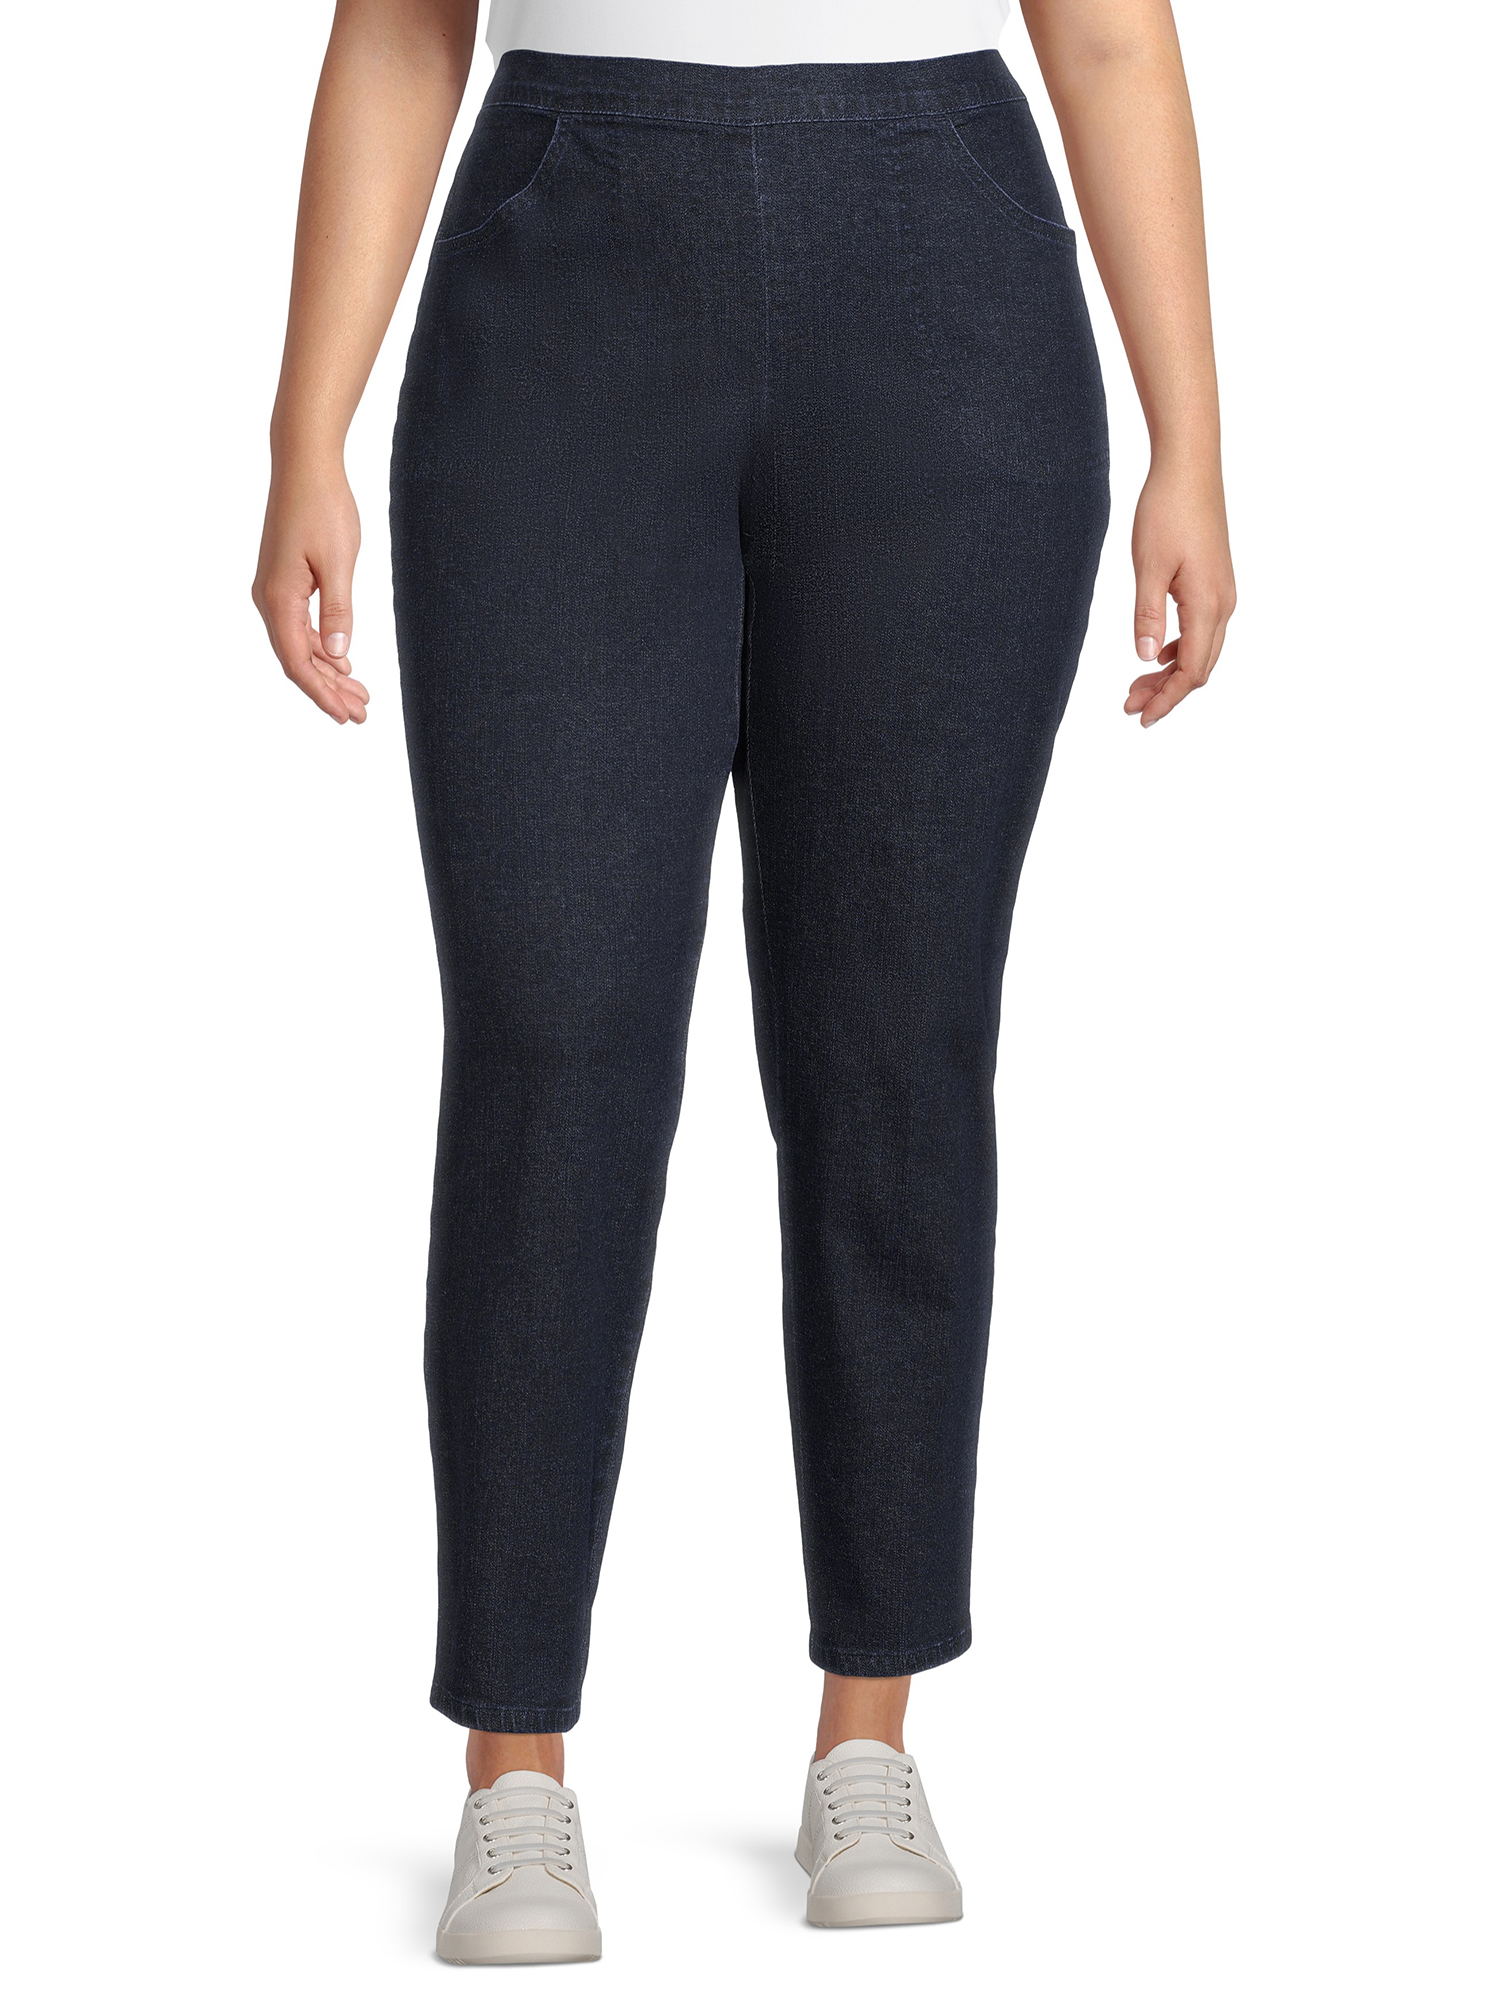 Just My Size Women's Plus Size 2 Pocket Pull On Pant, 2-Pack - image 2 of 6